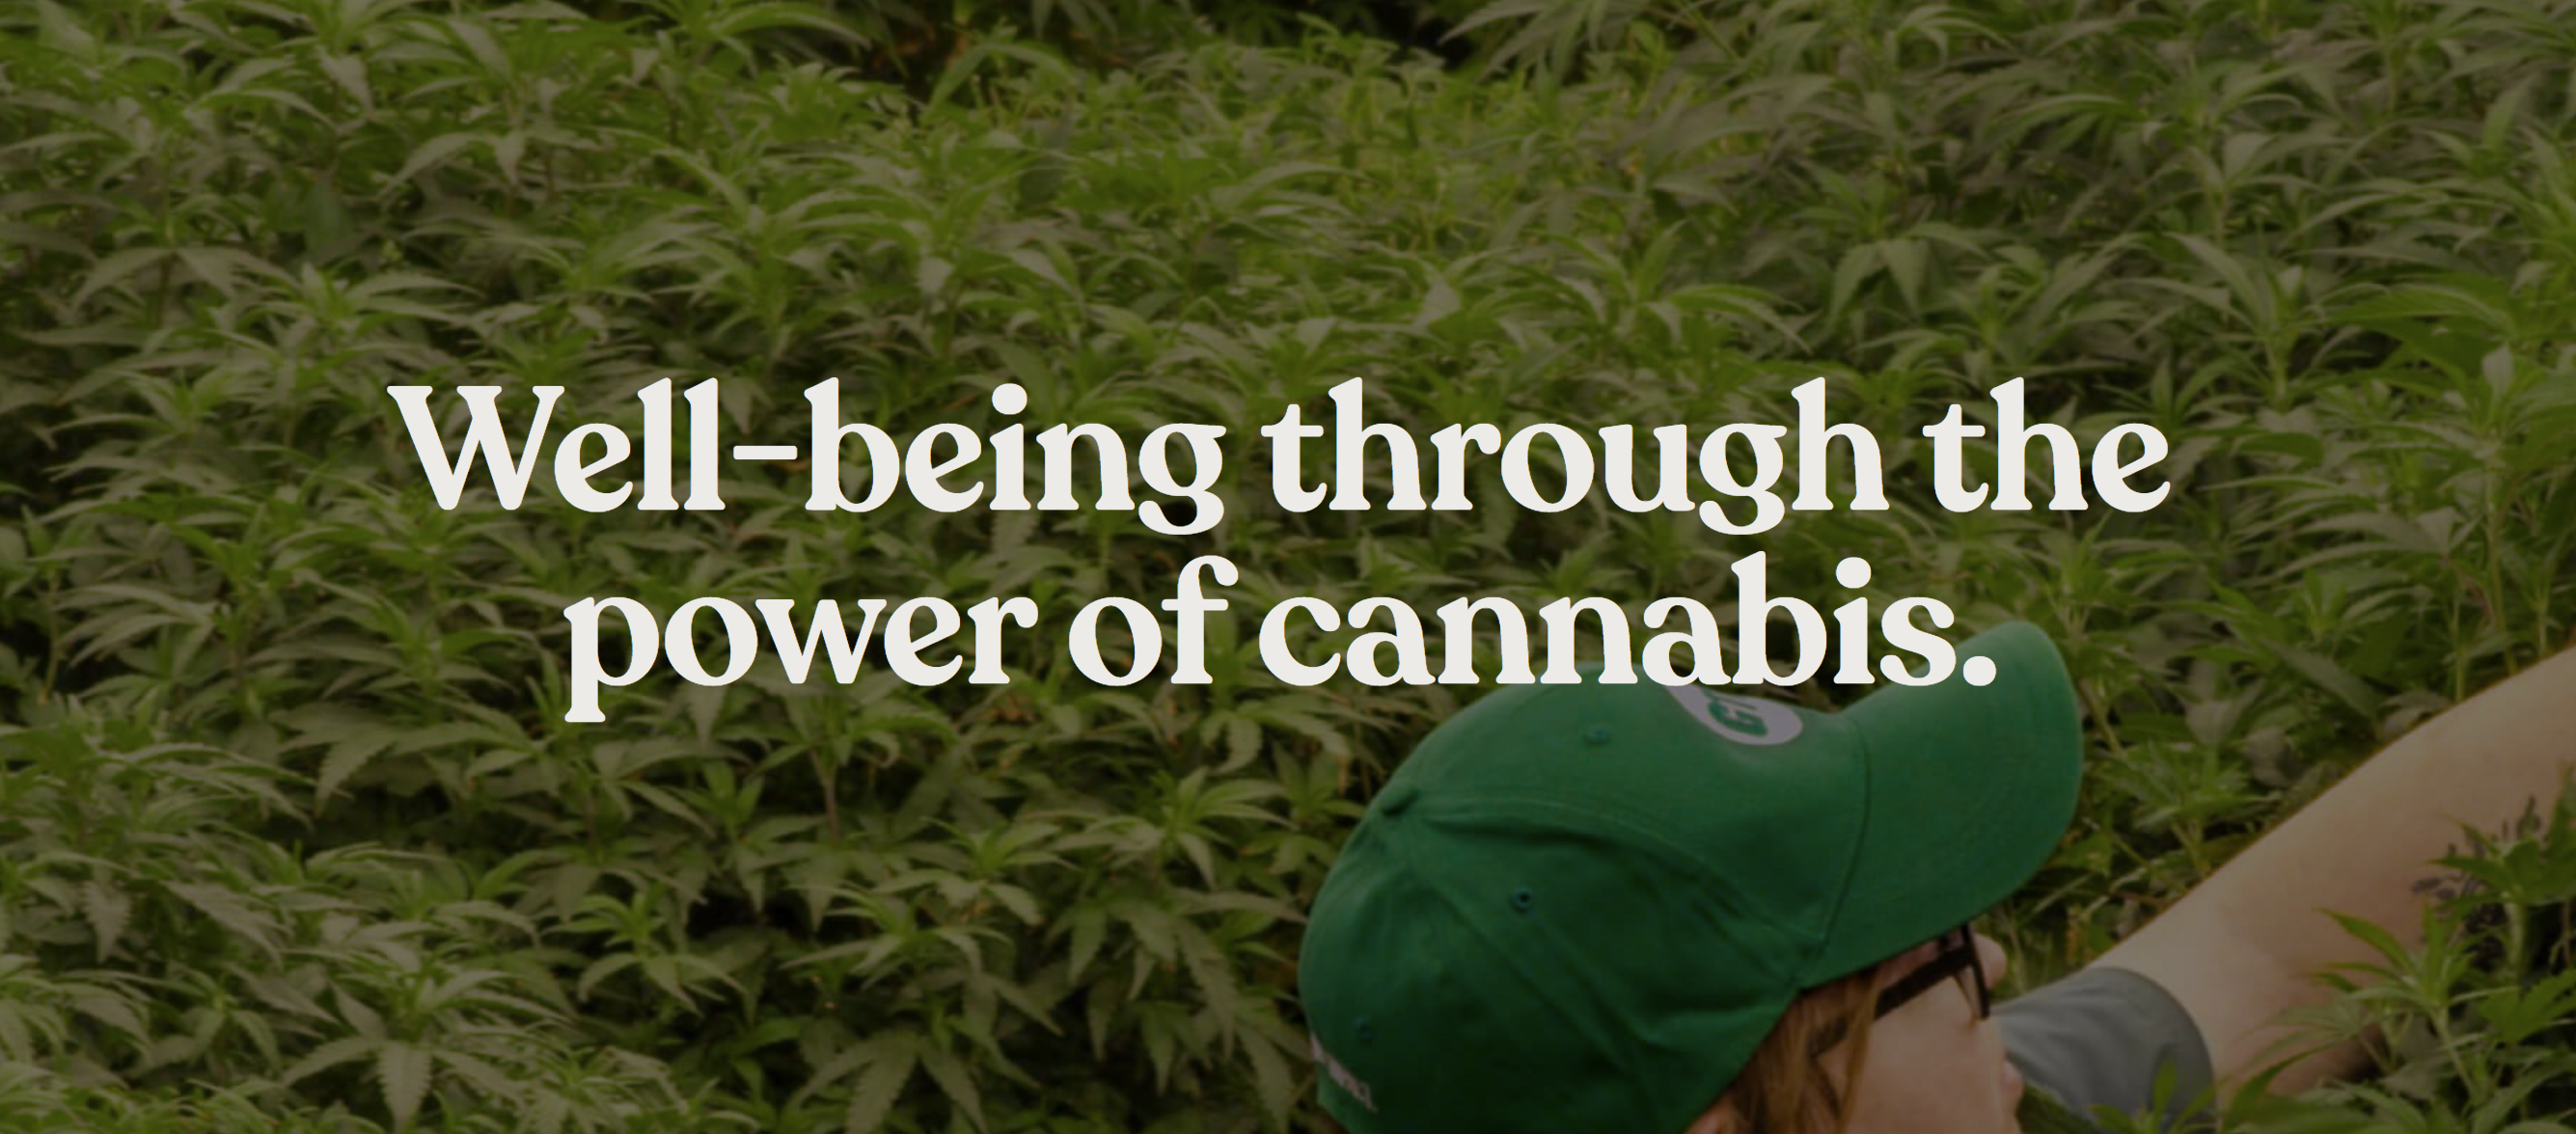 Well-being through the power of cannabis.